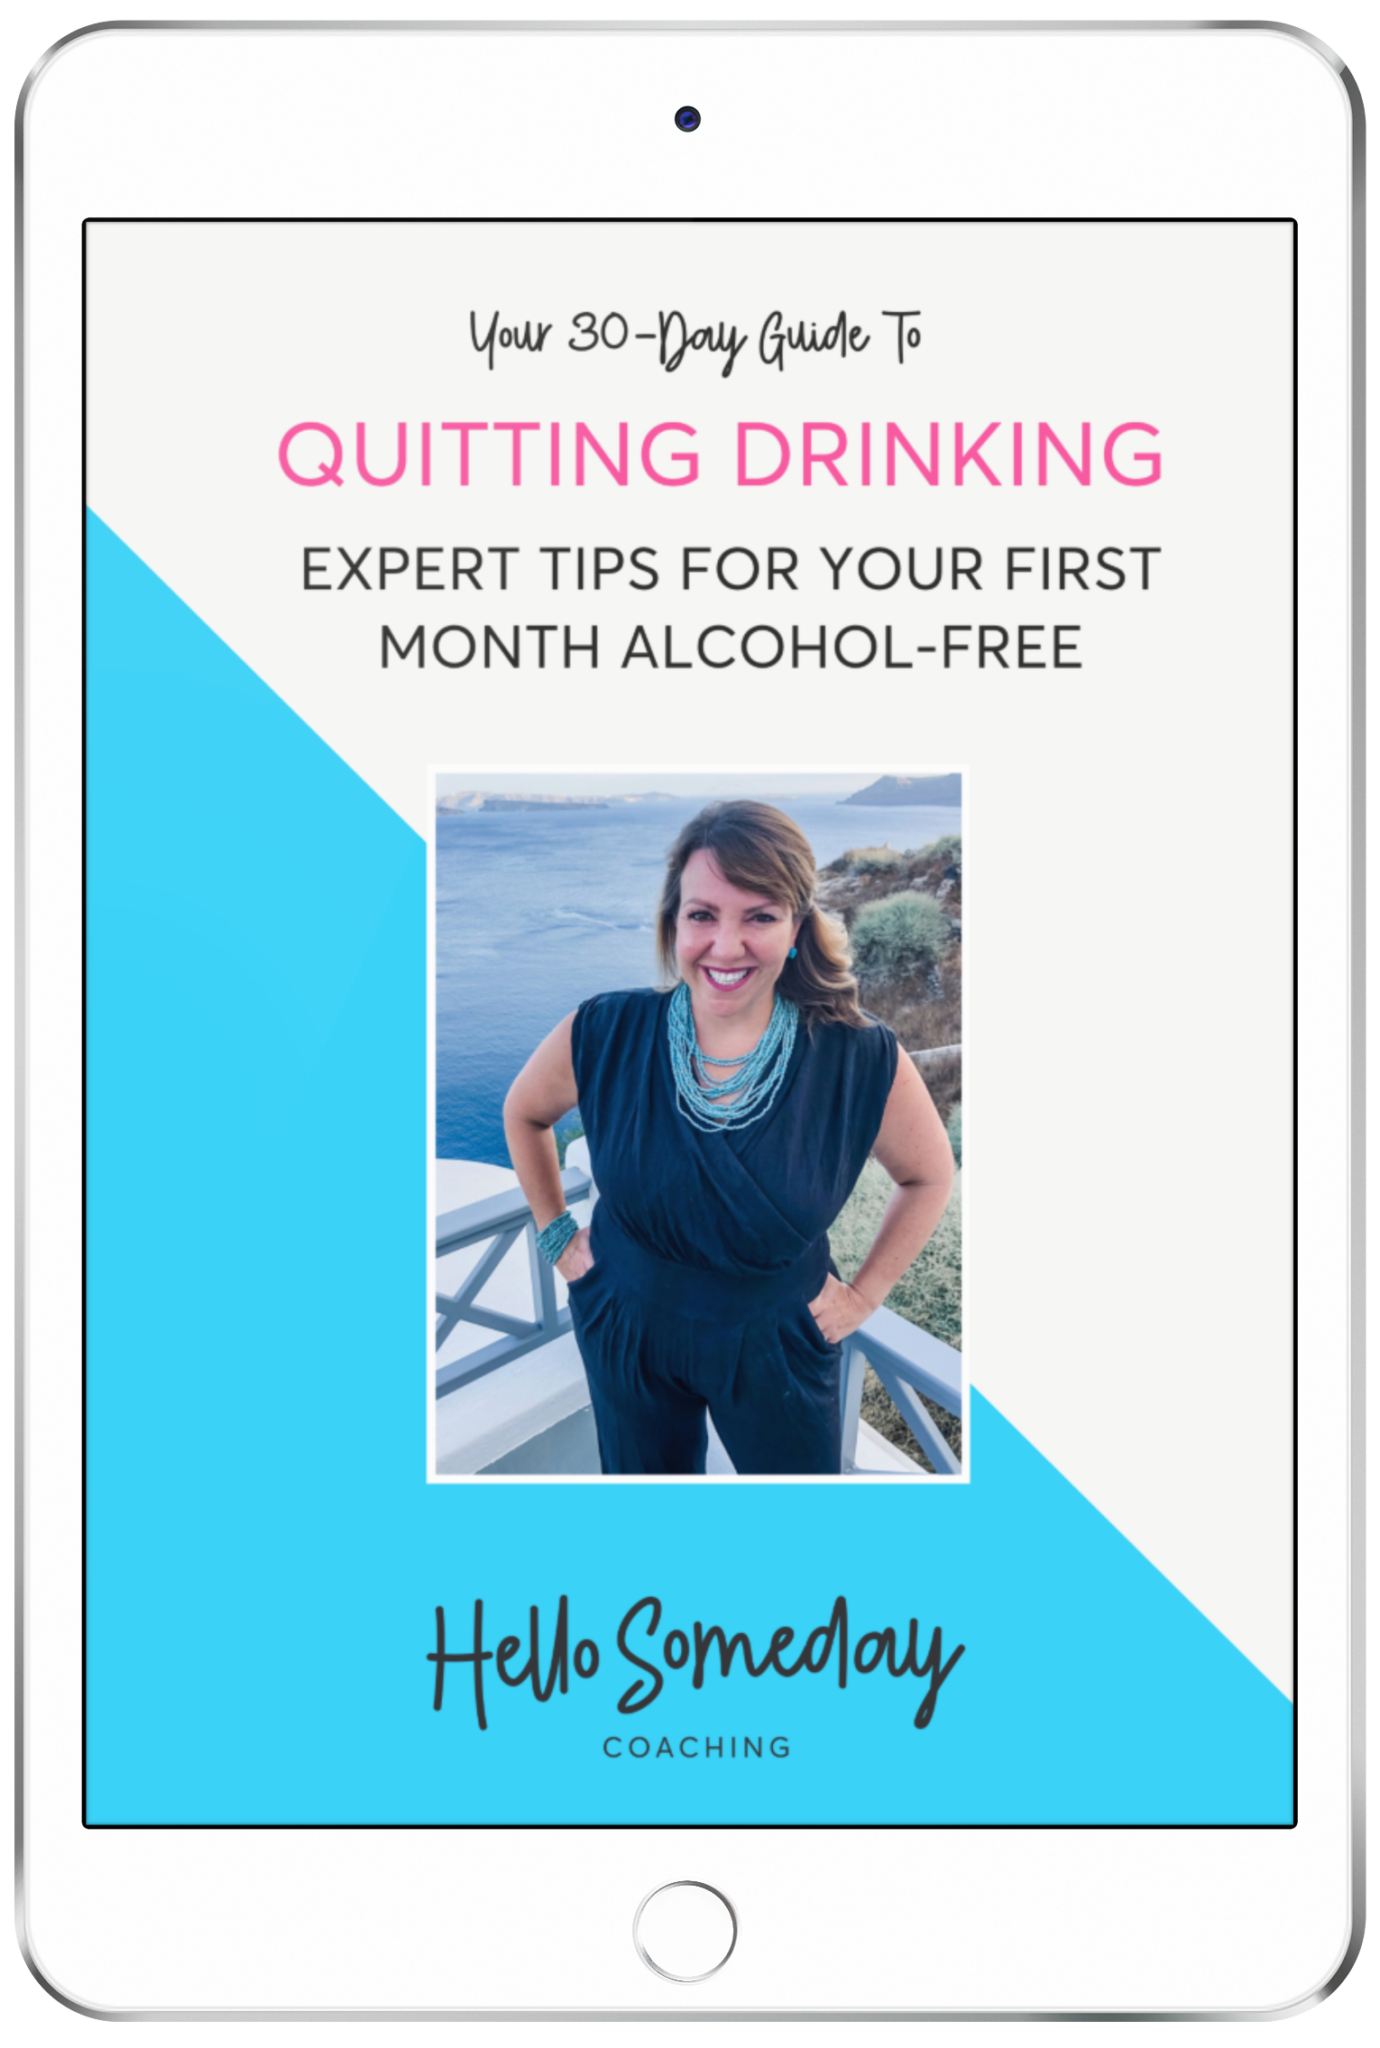 Free 30-Day Sober Guide For Women Quitting Drinking. Sober Coaching Tips For Your First Month Alcohol-Free From Hello Someday Coaching and Casey McGuire Davidson.